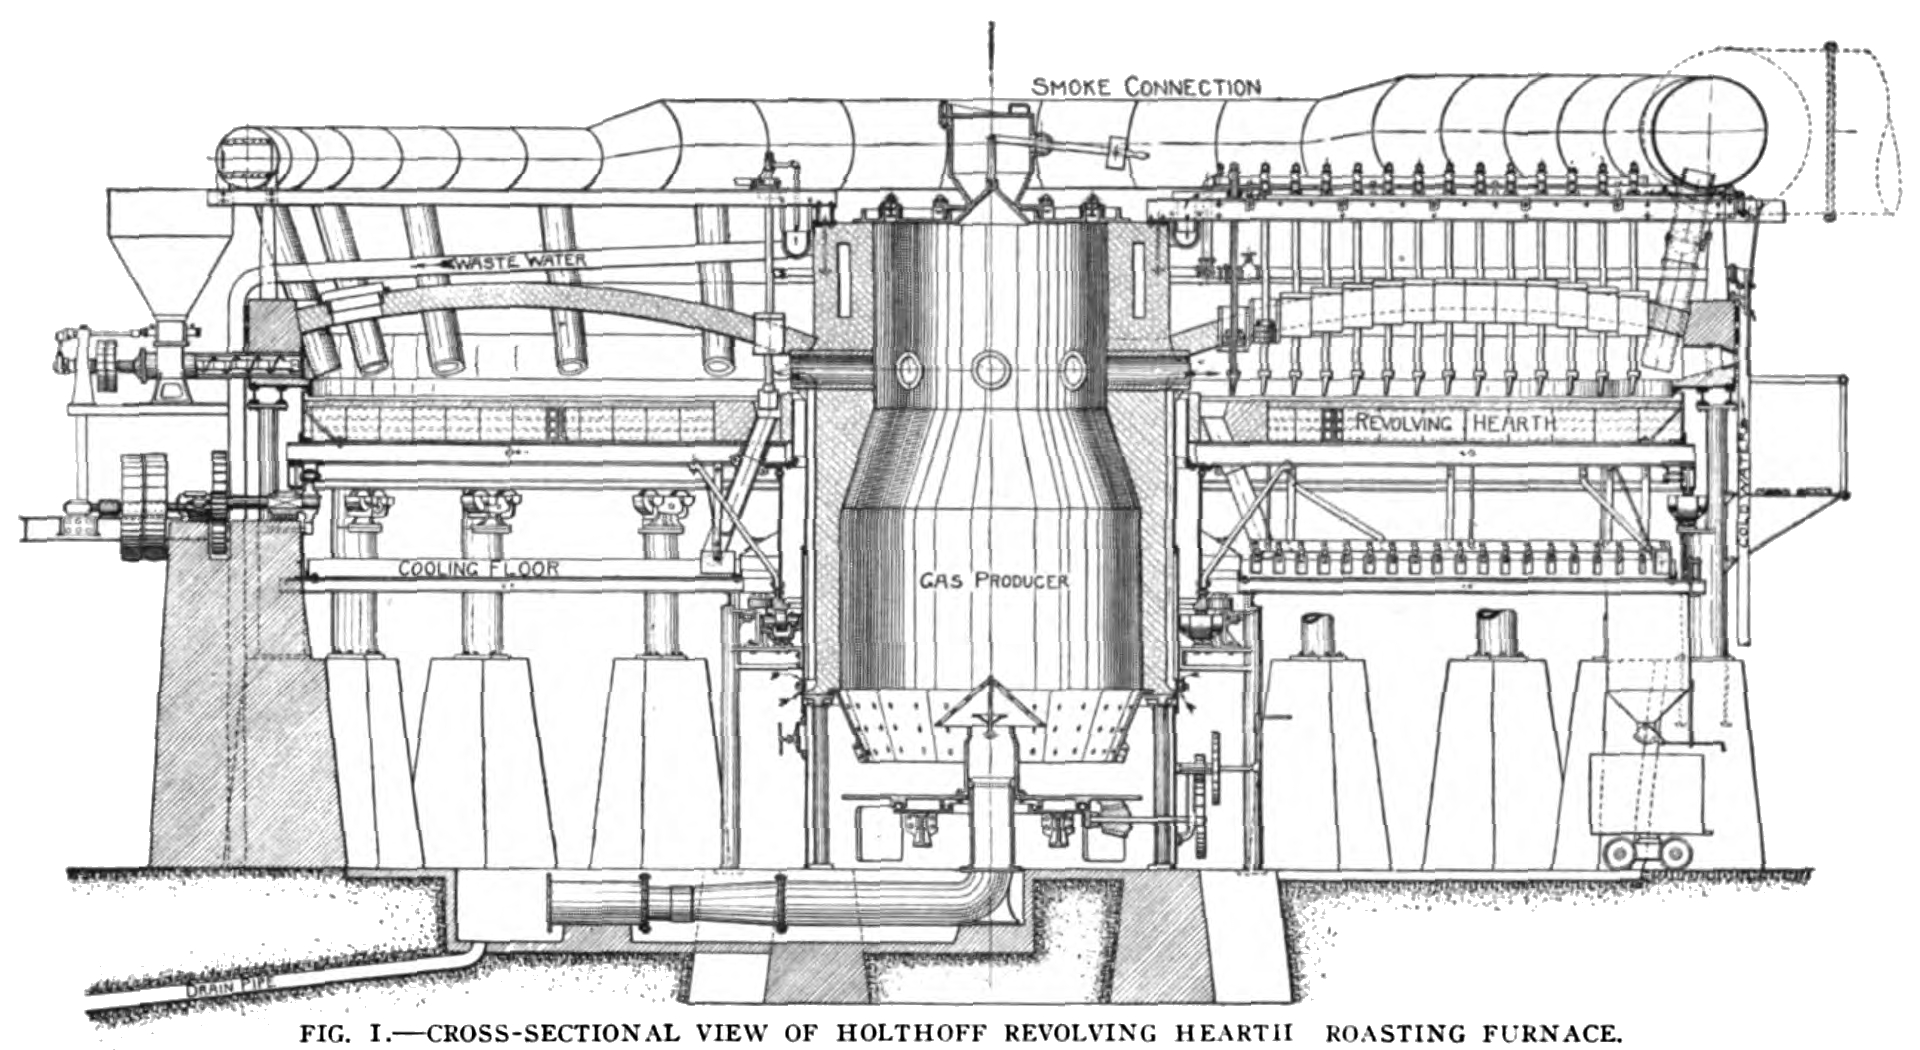 Fig. 1.—Cross-Sectional View of Holthoff Revolving Hearth Roasting Furnace